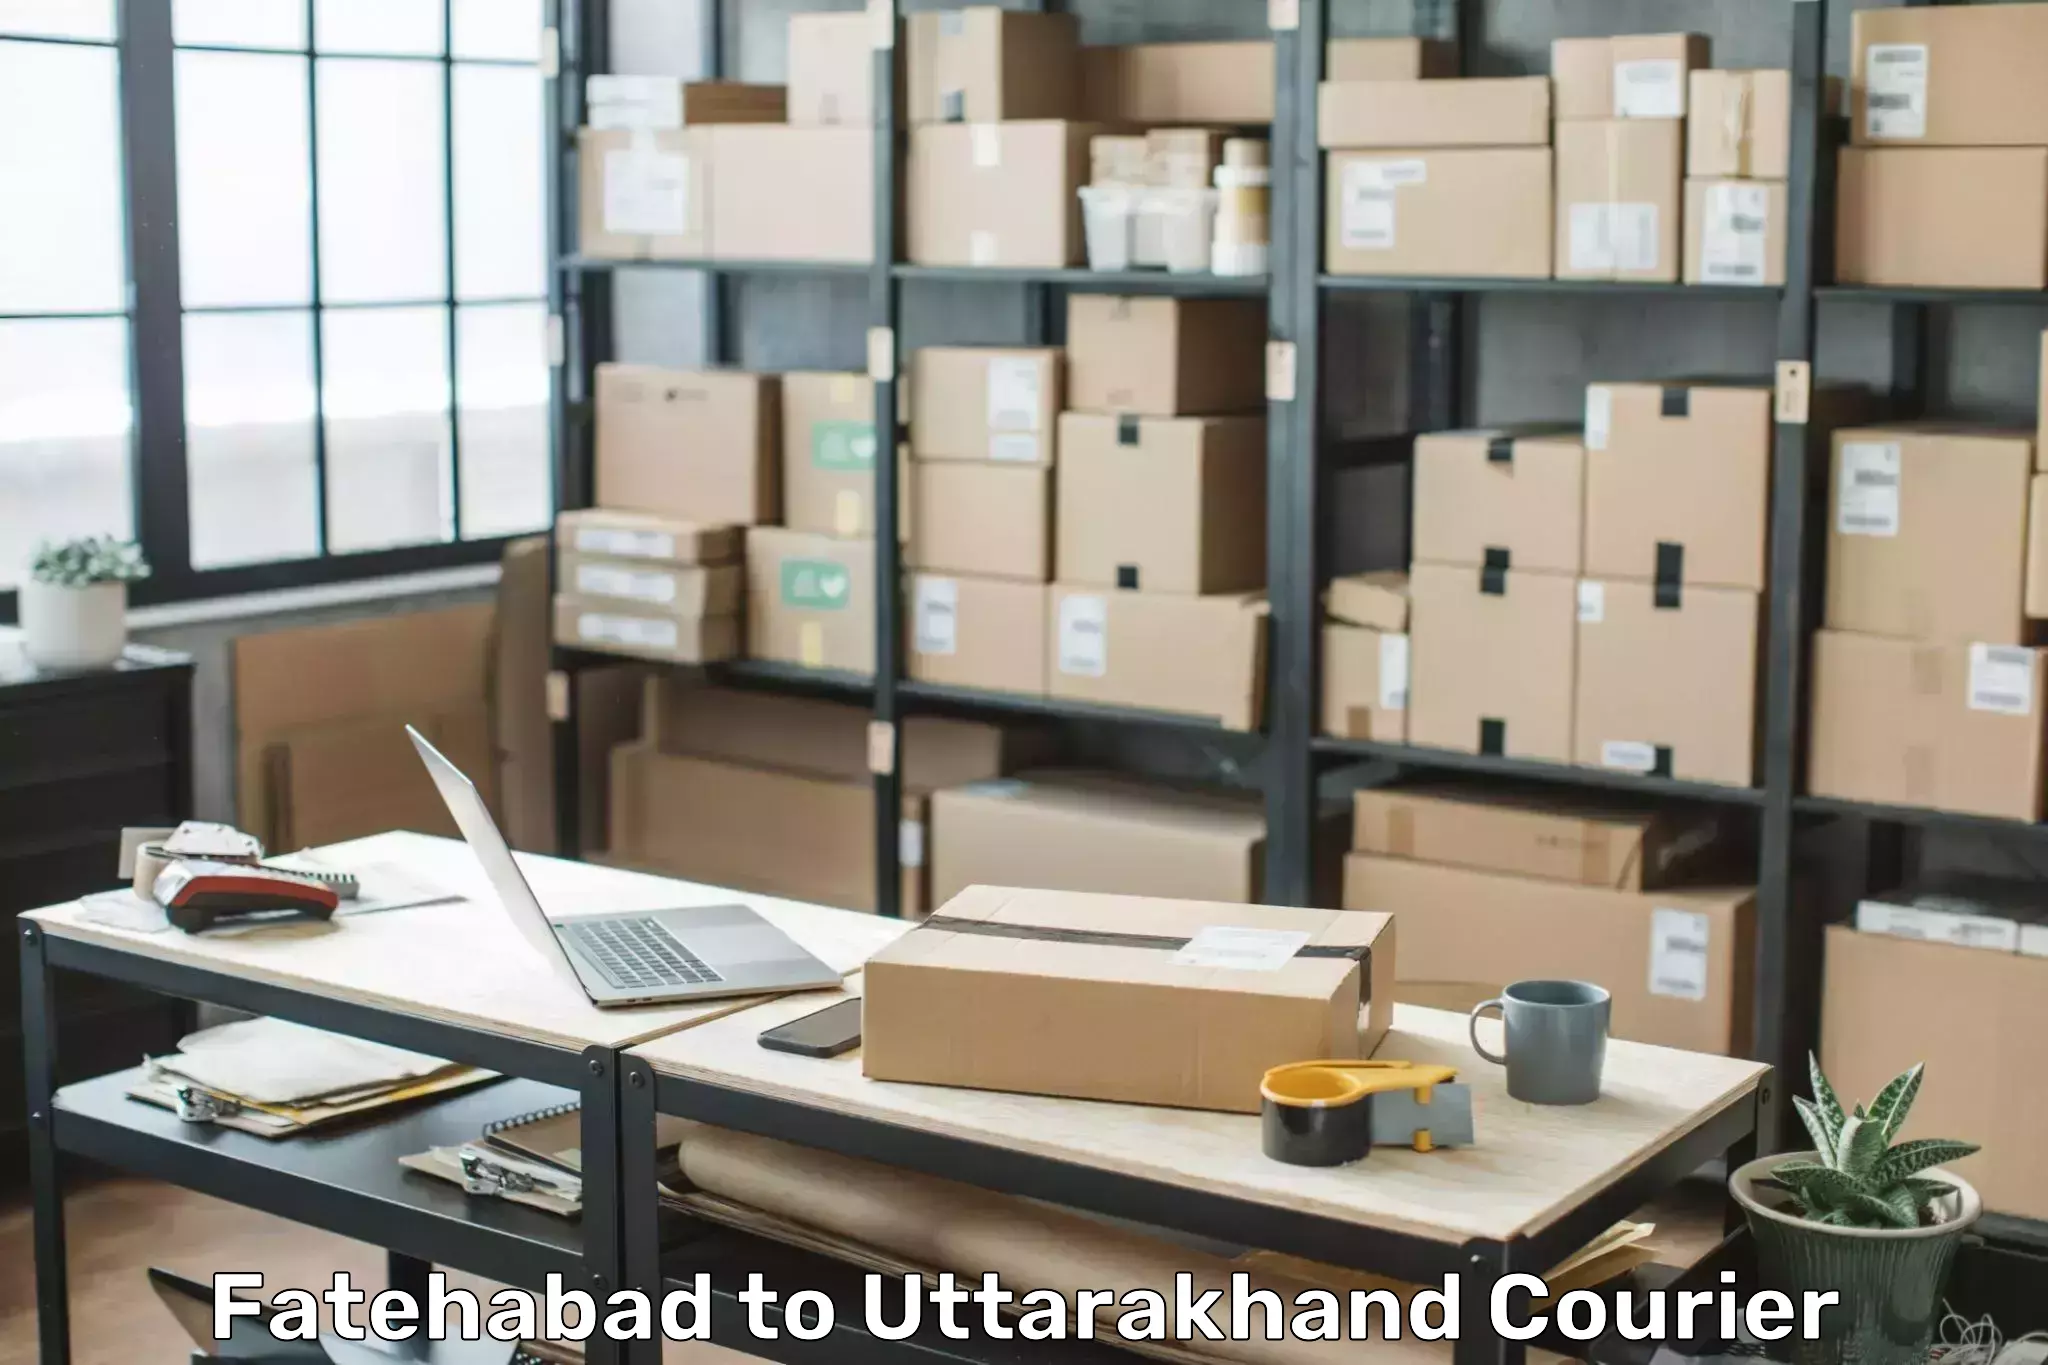 Instant baggage transport quote Fatehabad to Haridwar